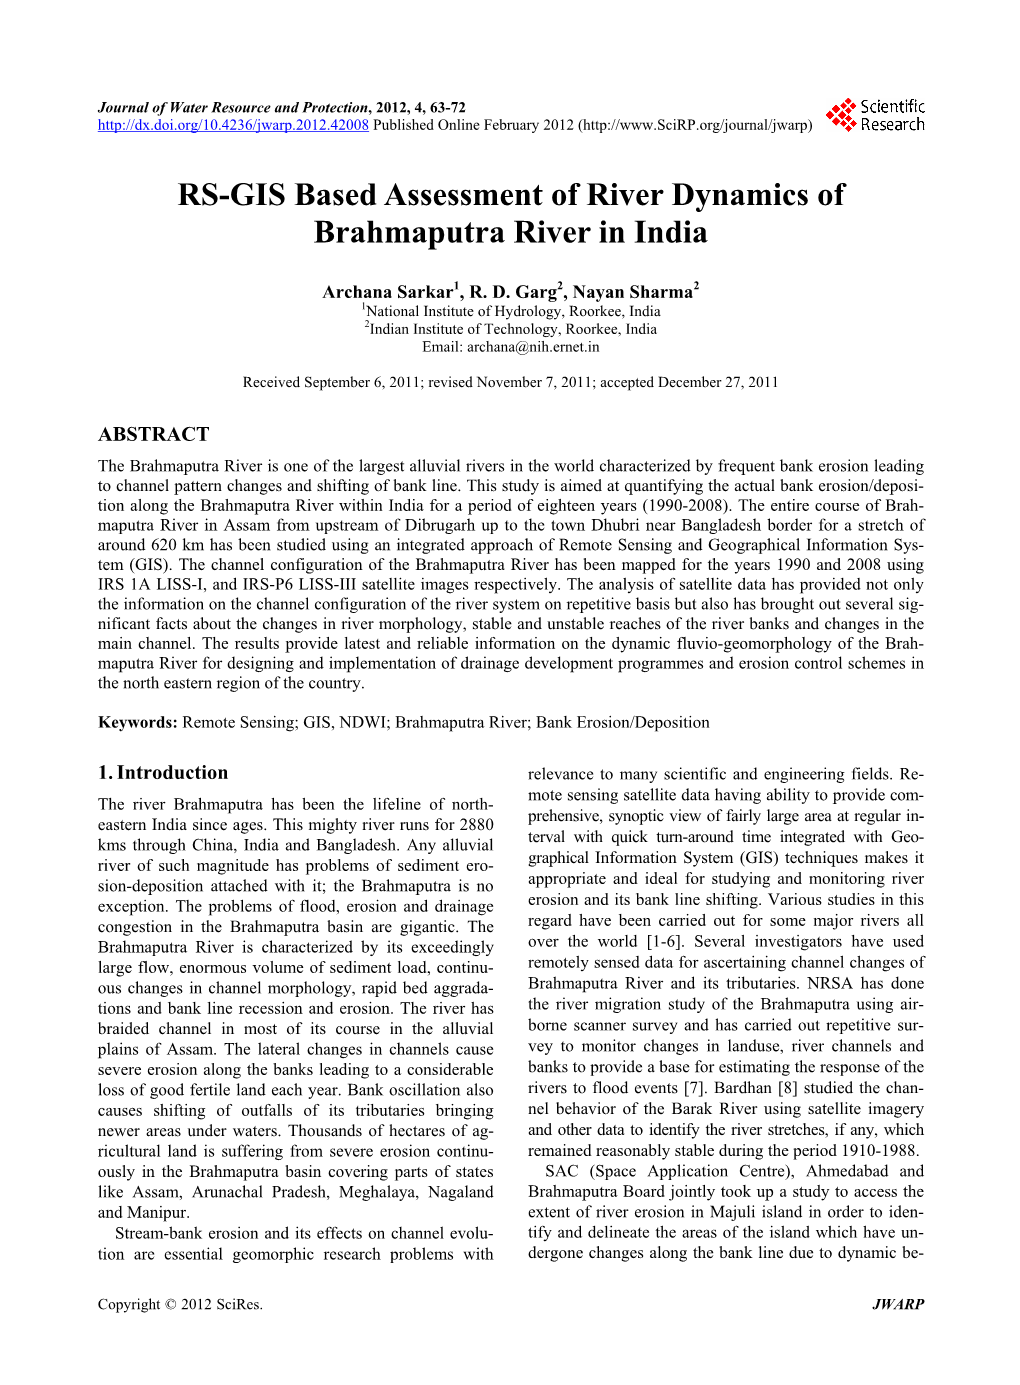 RS-GIS Based Assessment of River Dynamics of Brahmaputra River in India